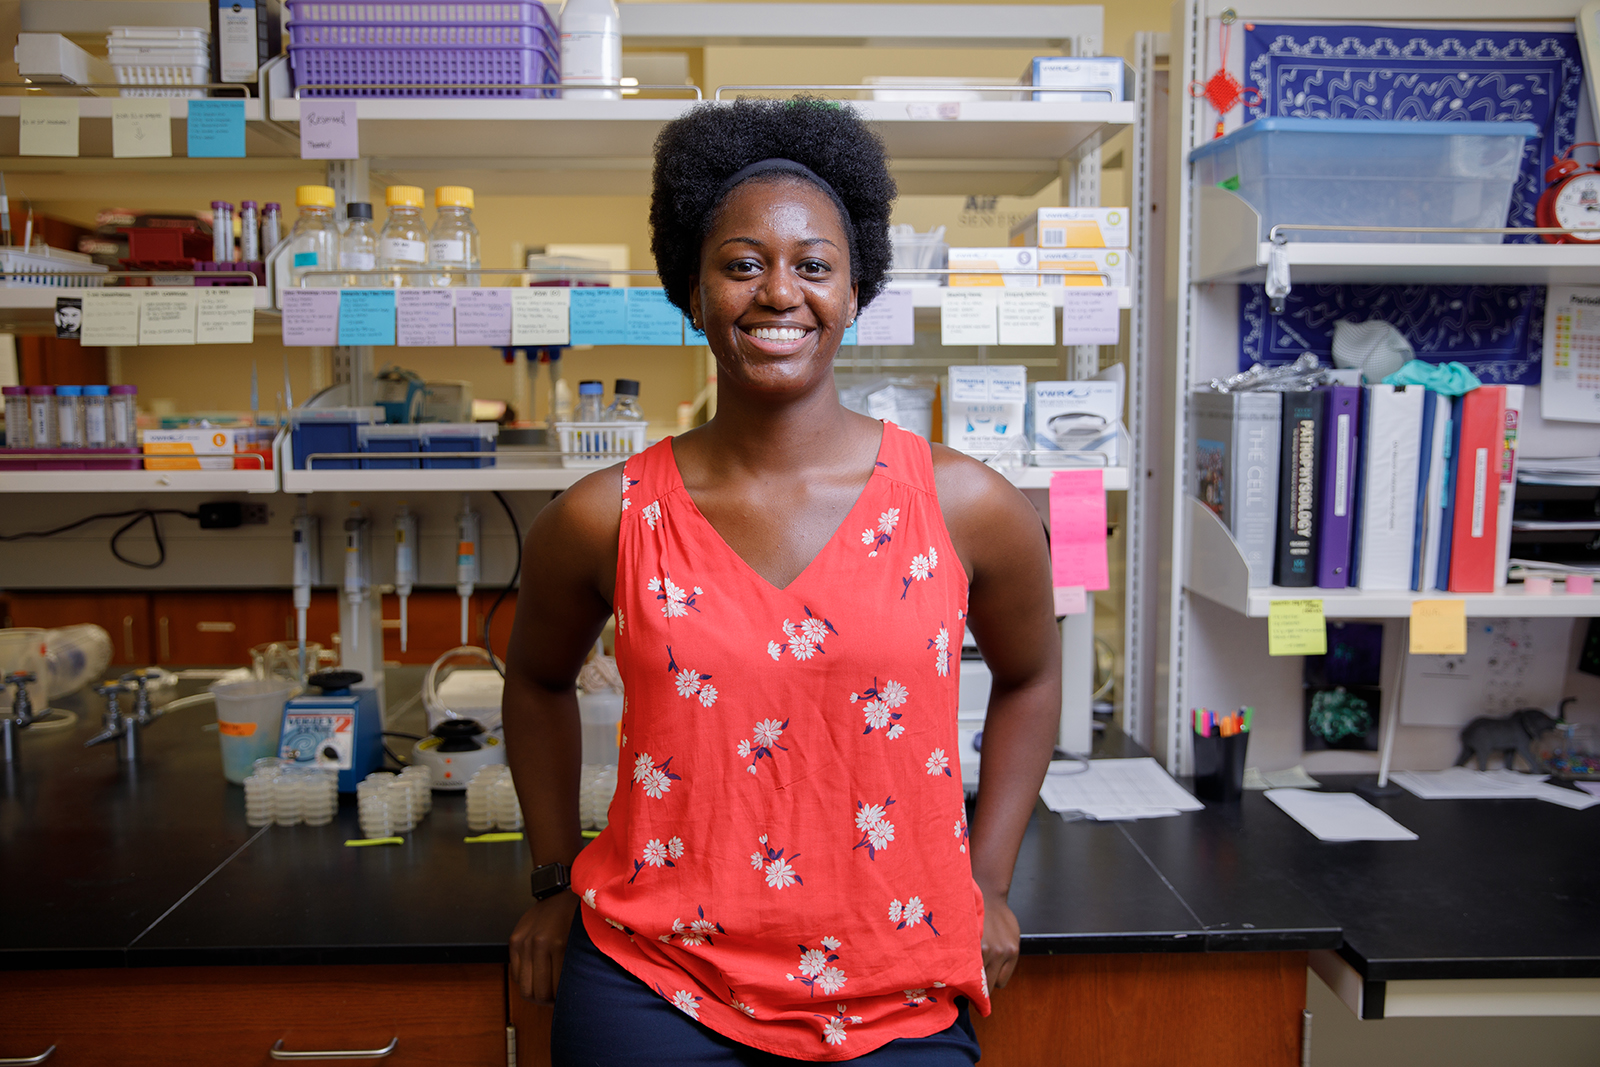 A University of Alabama graduate student poses near her workspace in a biolgoical research lab.